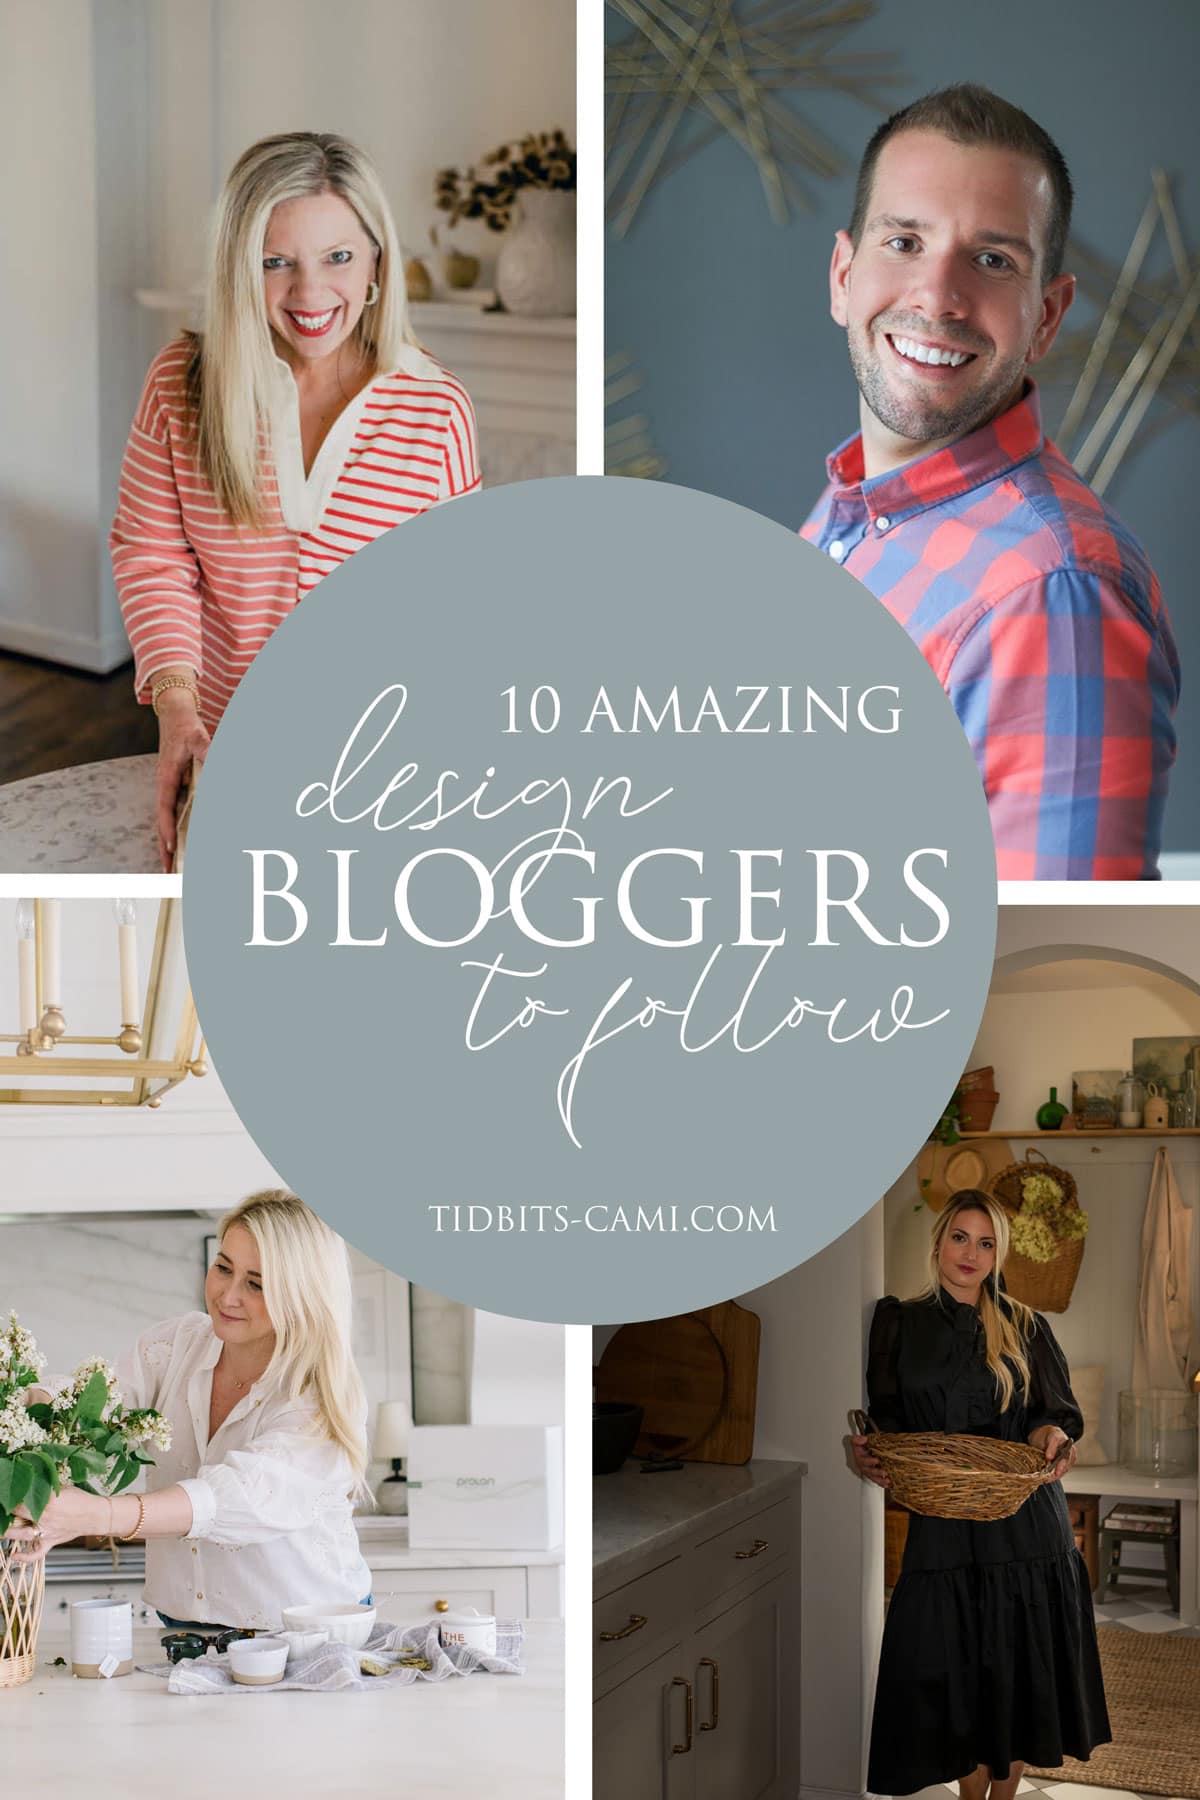 The Best Interior Design Bloggers to Follow for Decorating Ideas